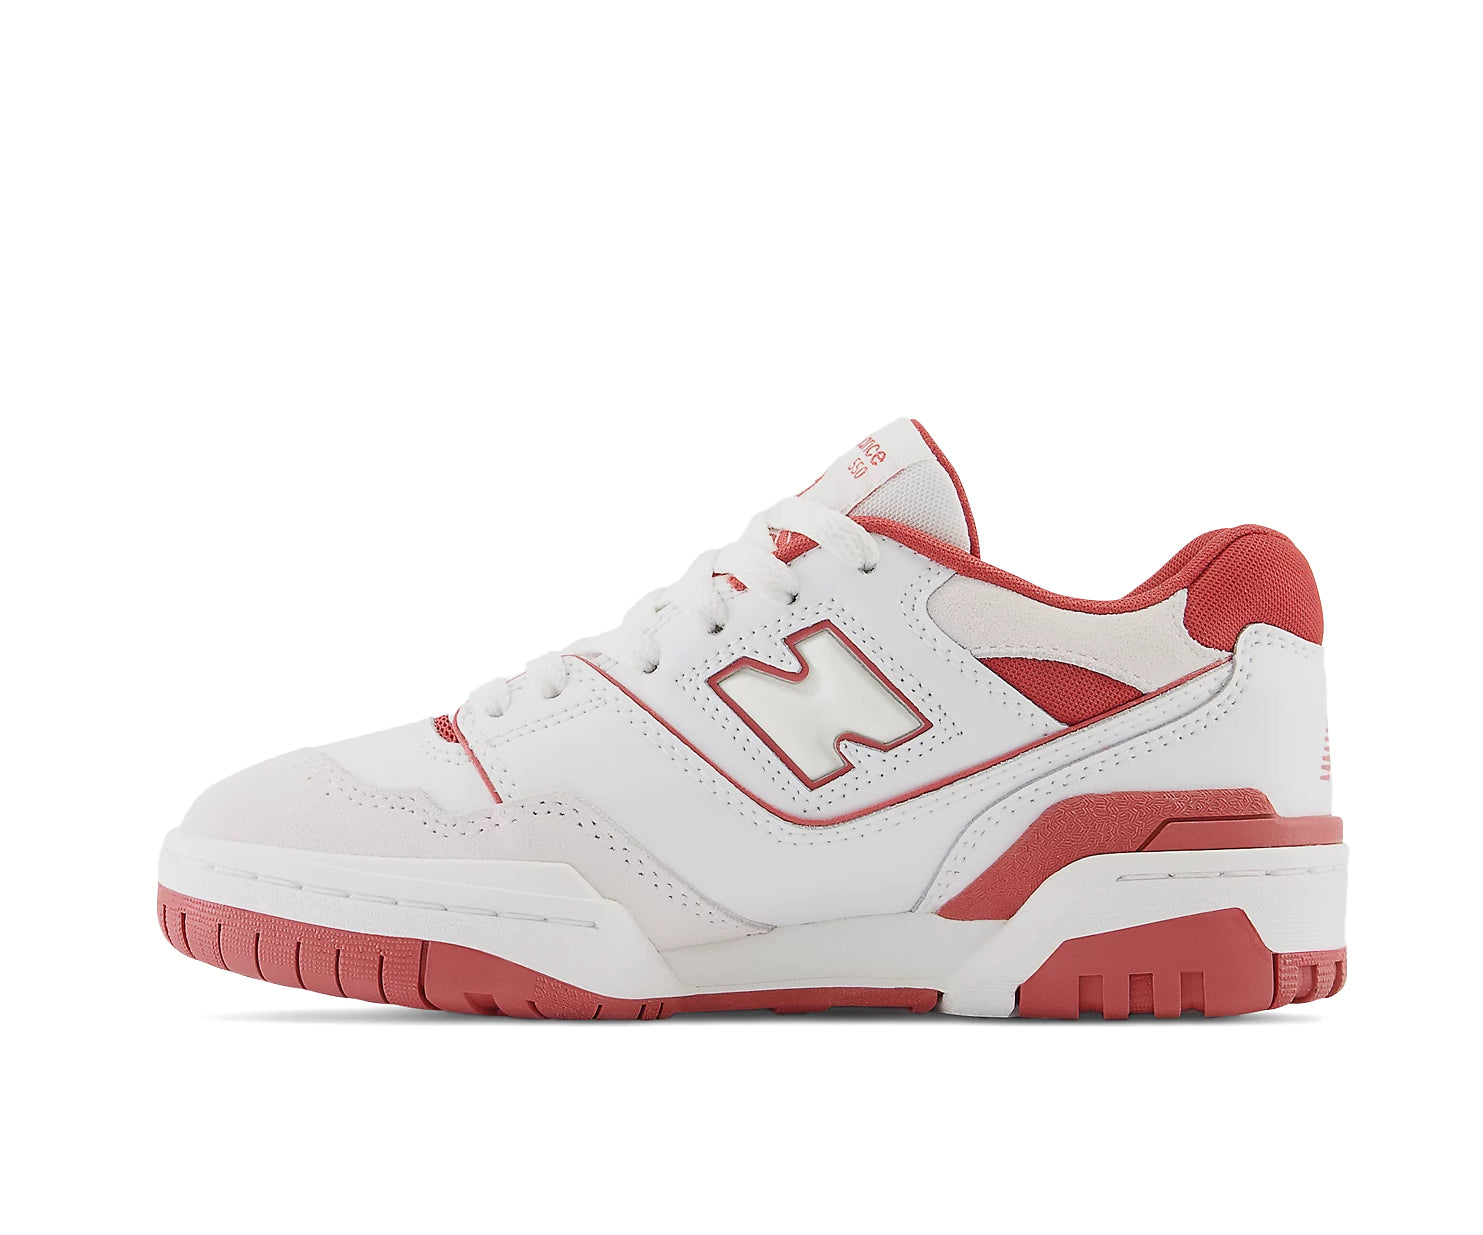 A white and red leather basketball sneaker from New Balance.